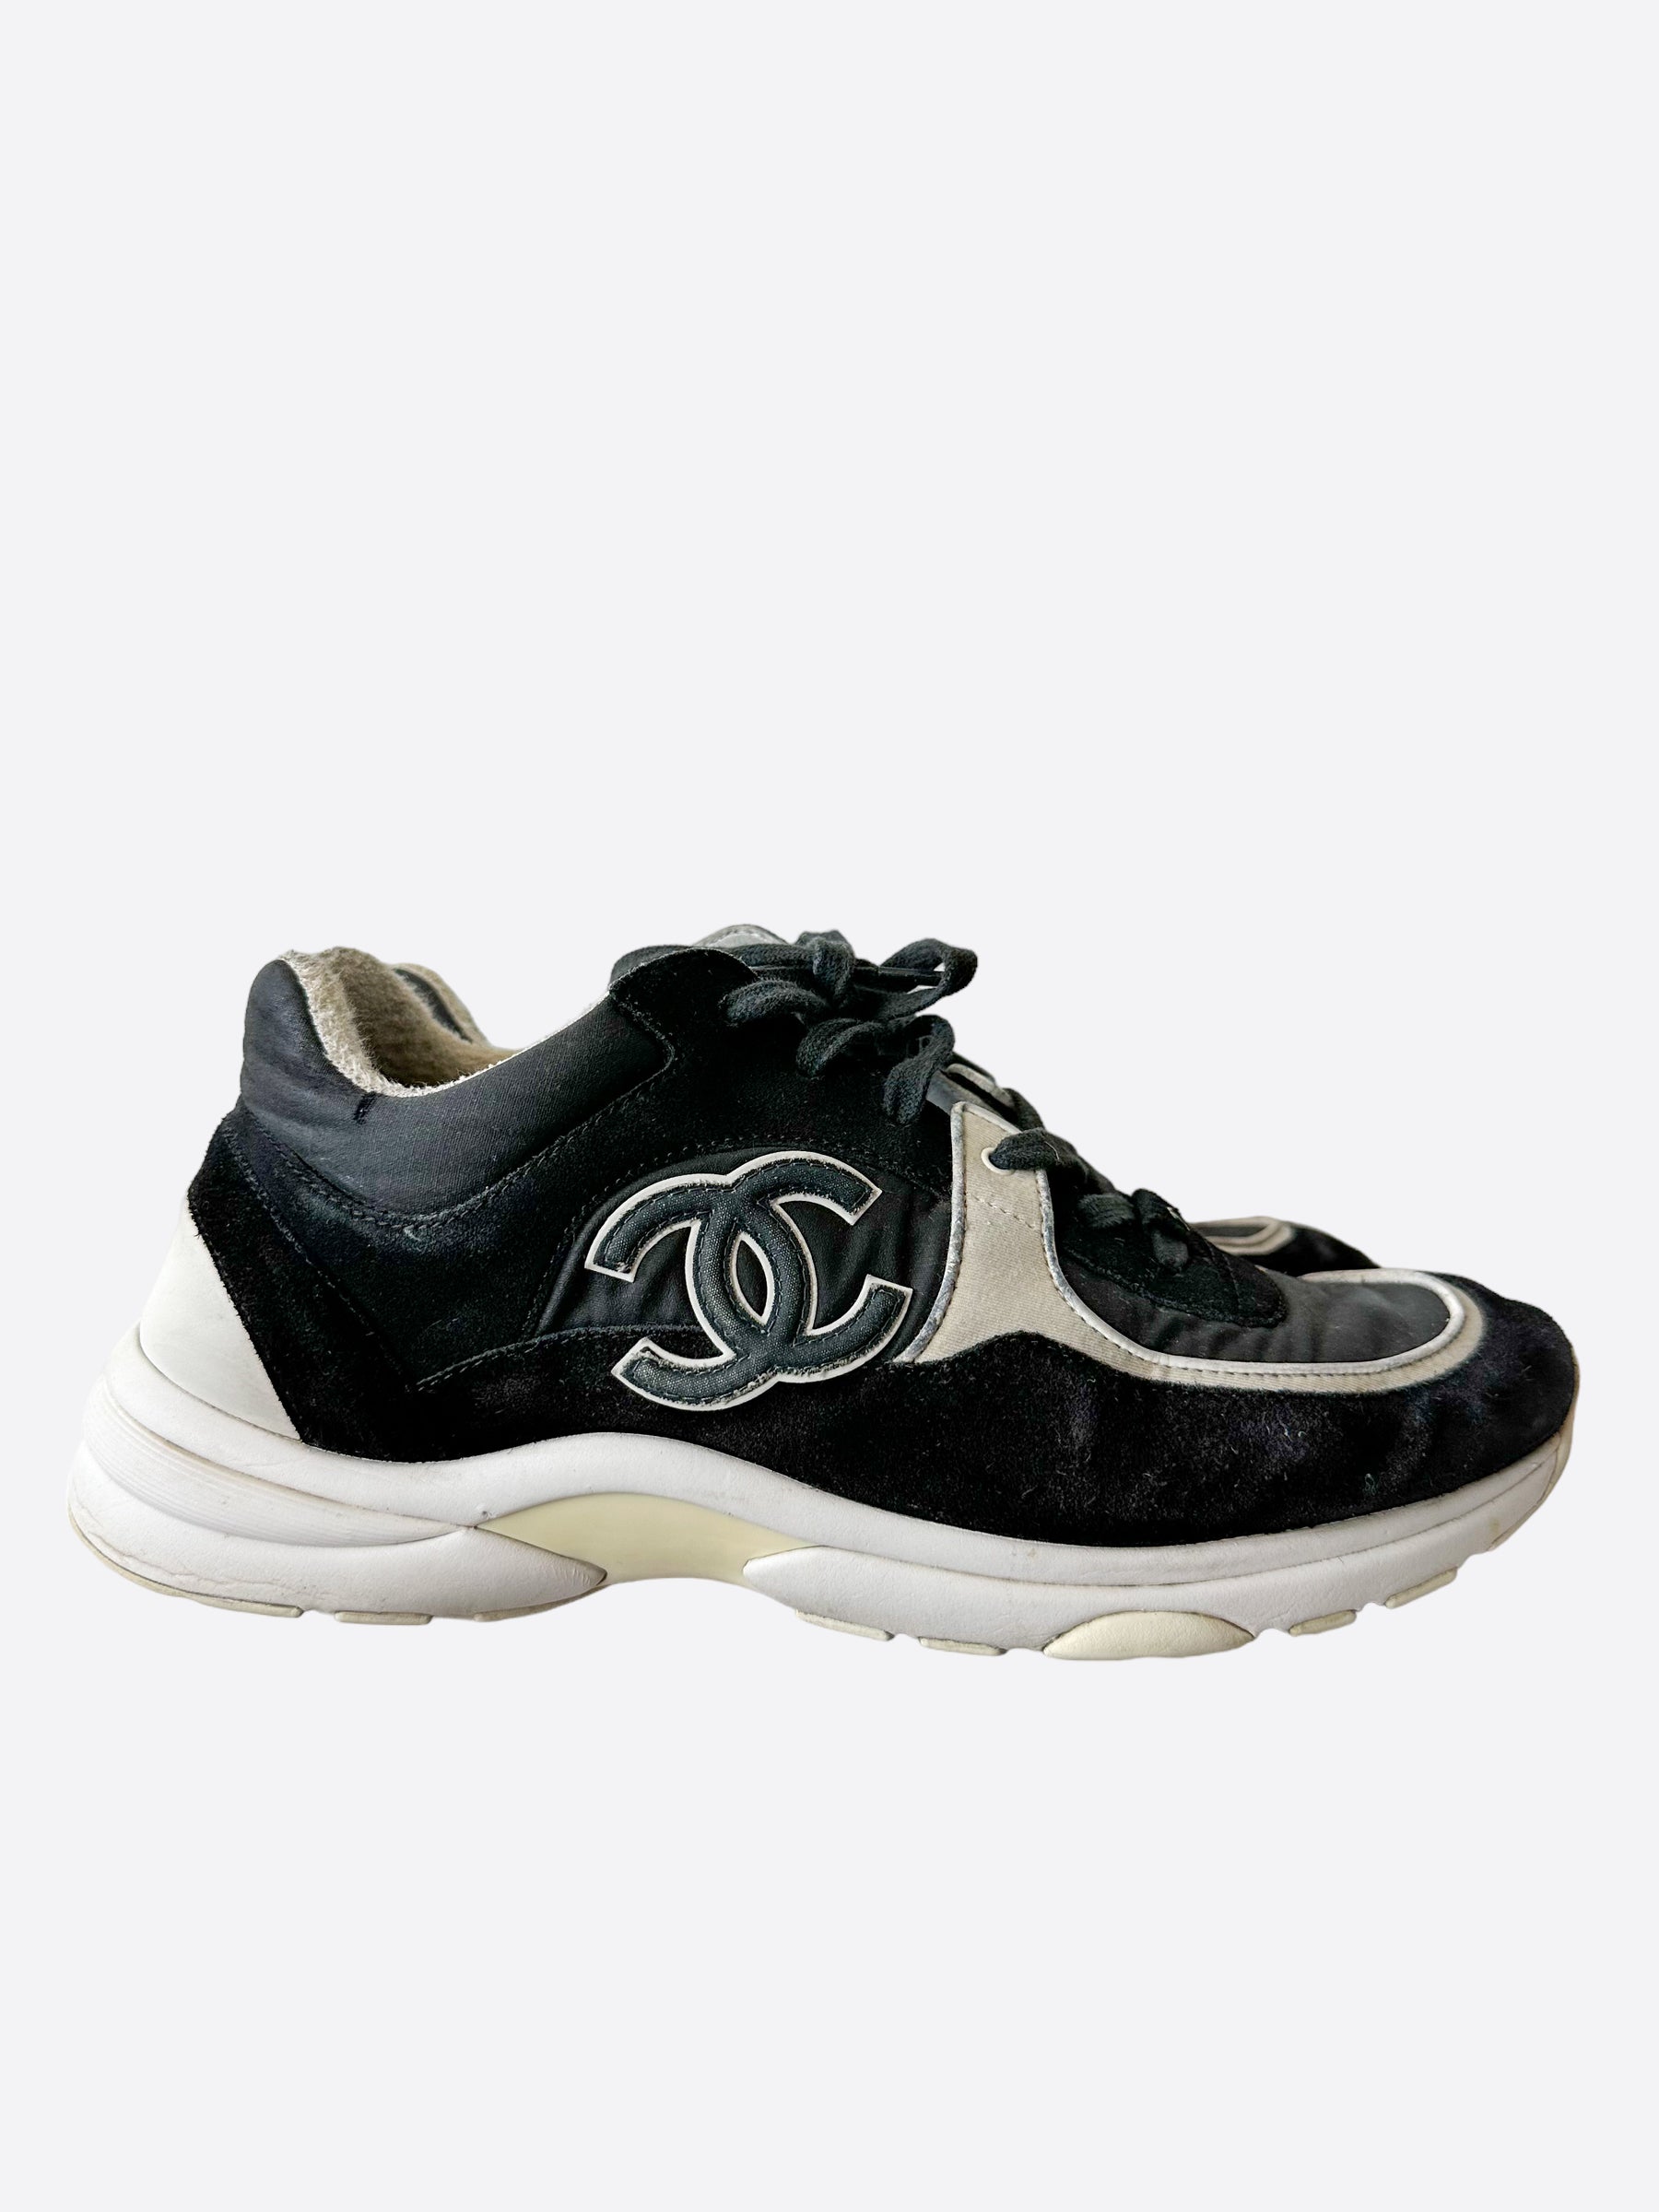 Chanel Black And White Suede Leather CC Logo Trainers - SAVIC